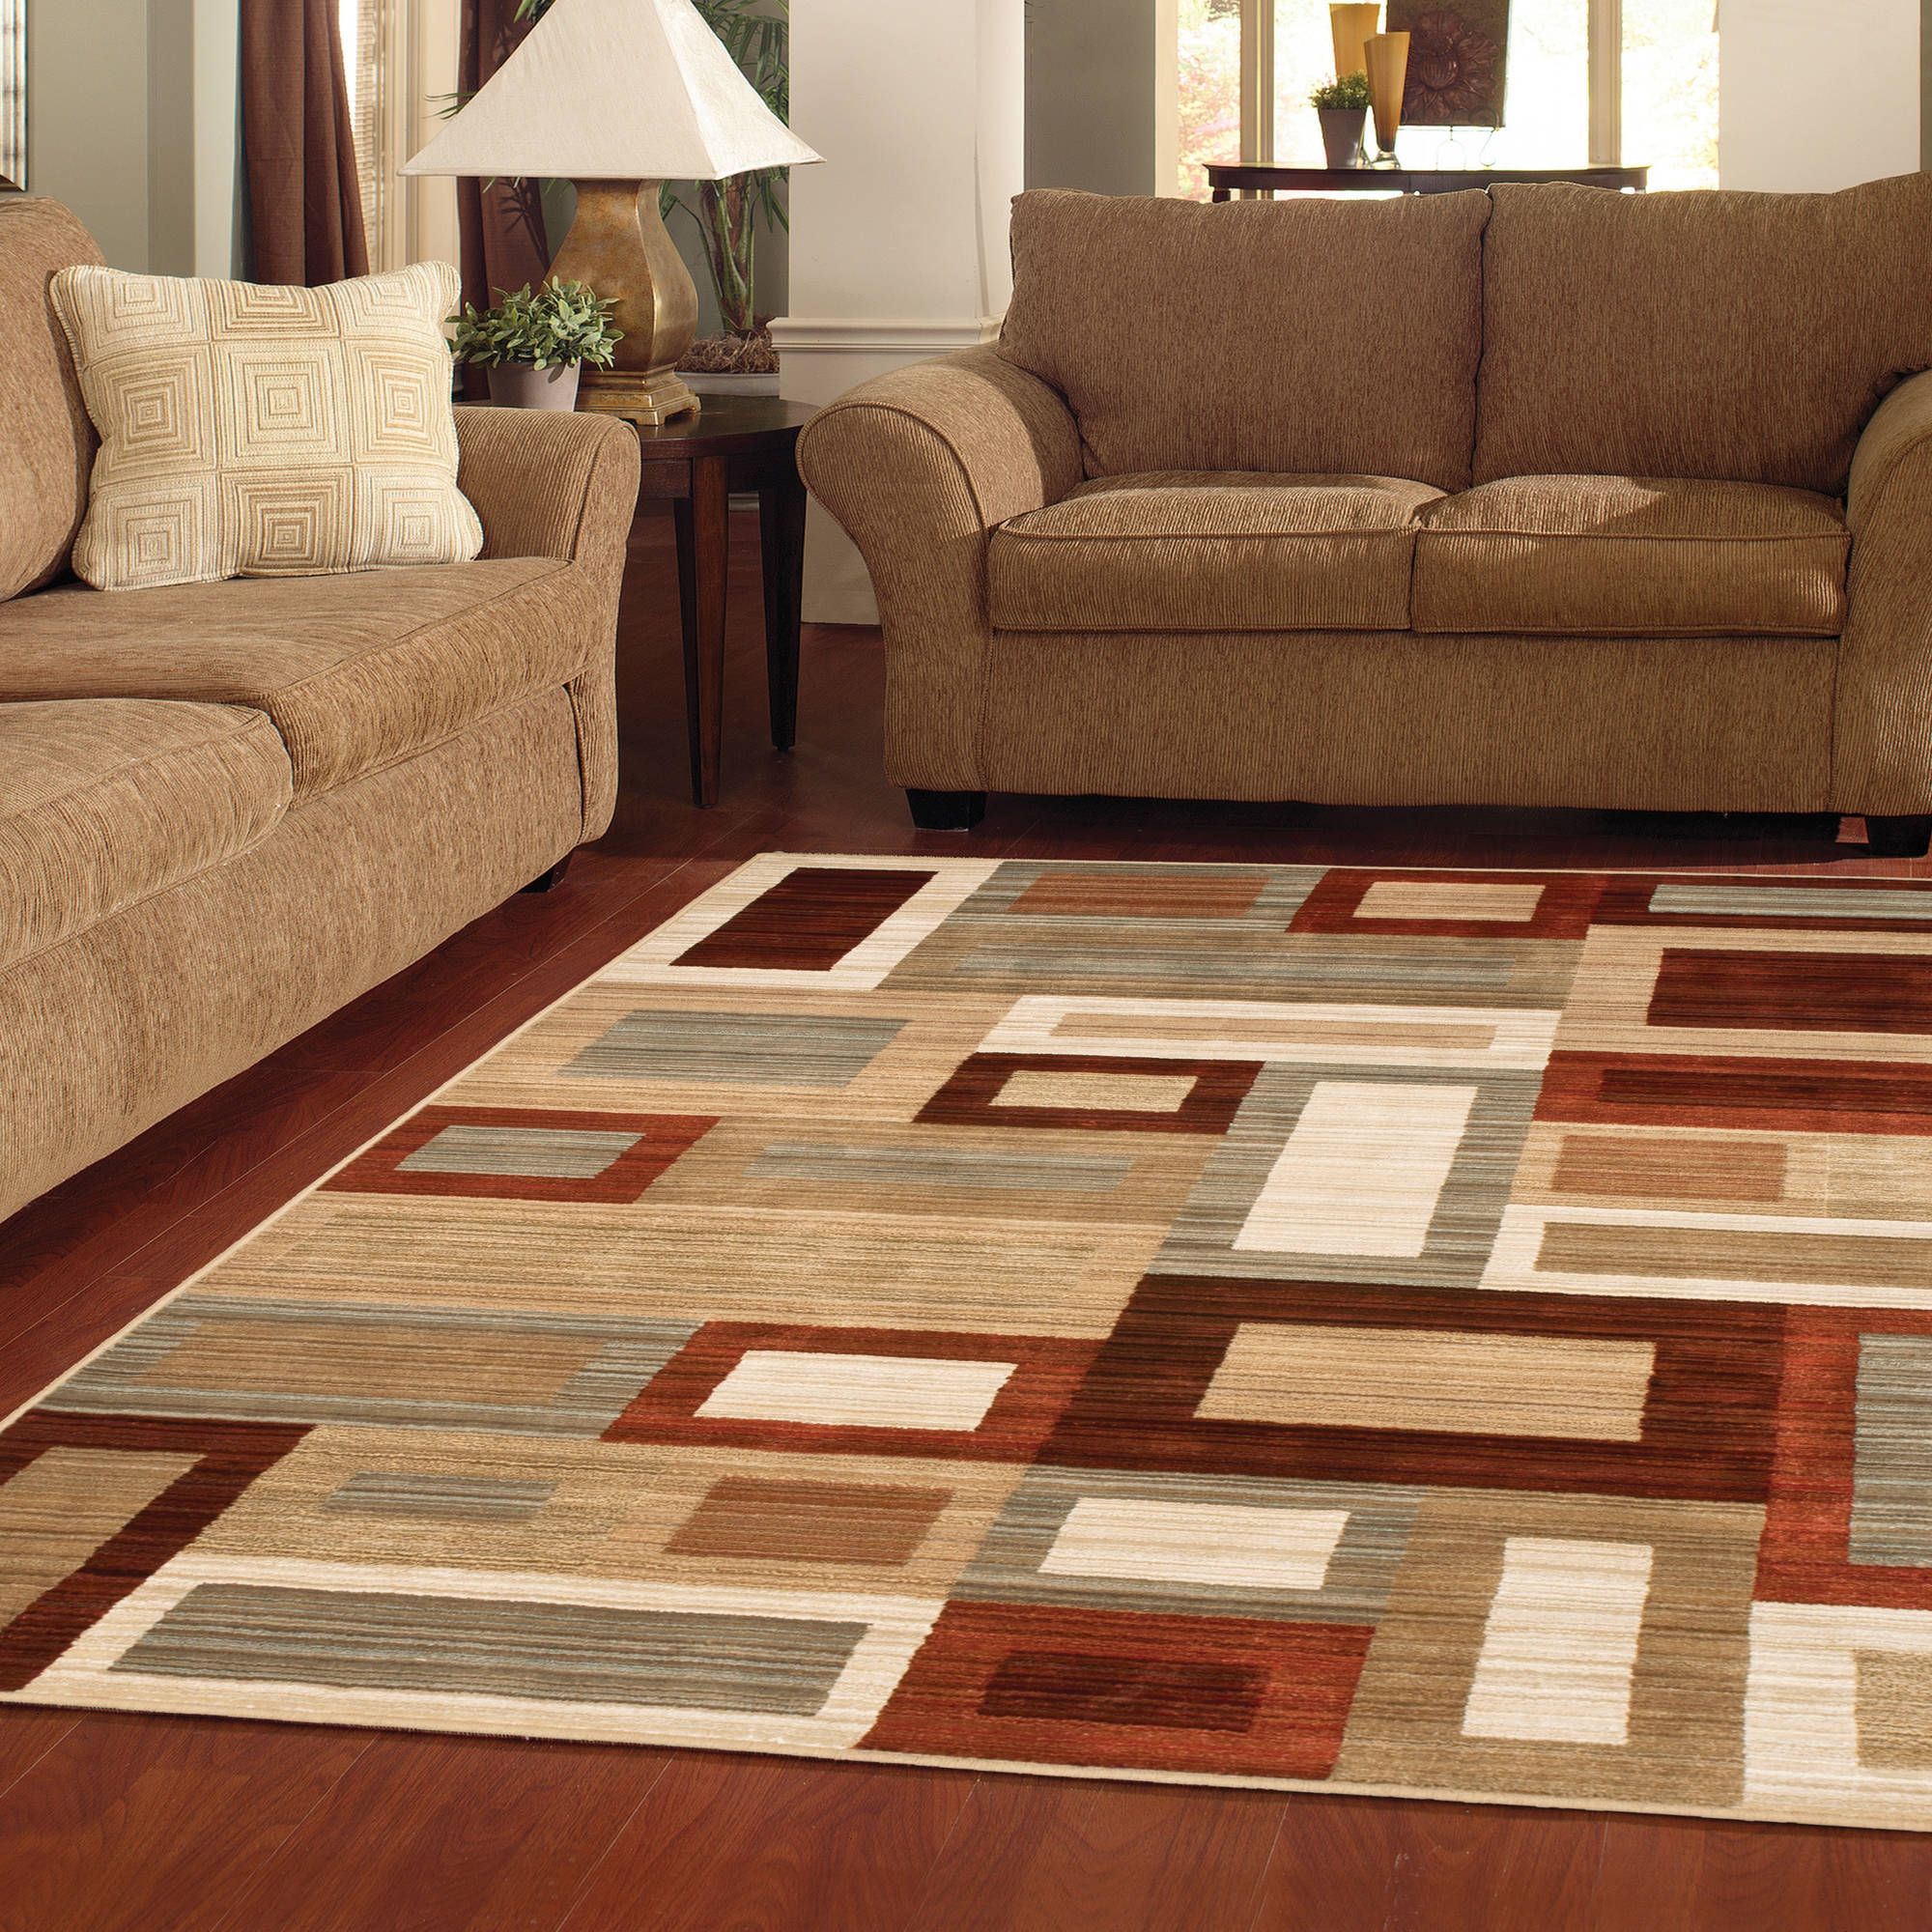 Better Homes And Gardens Franklin Squares Area Rug Or Runner Pertaining To Hallway Runners At Walmart (Photo 10 of 20)